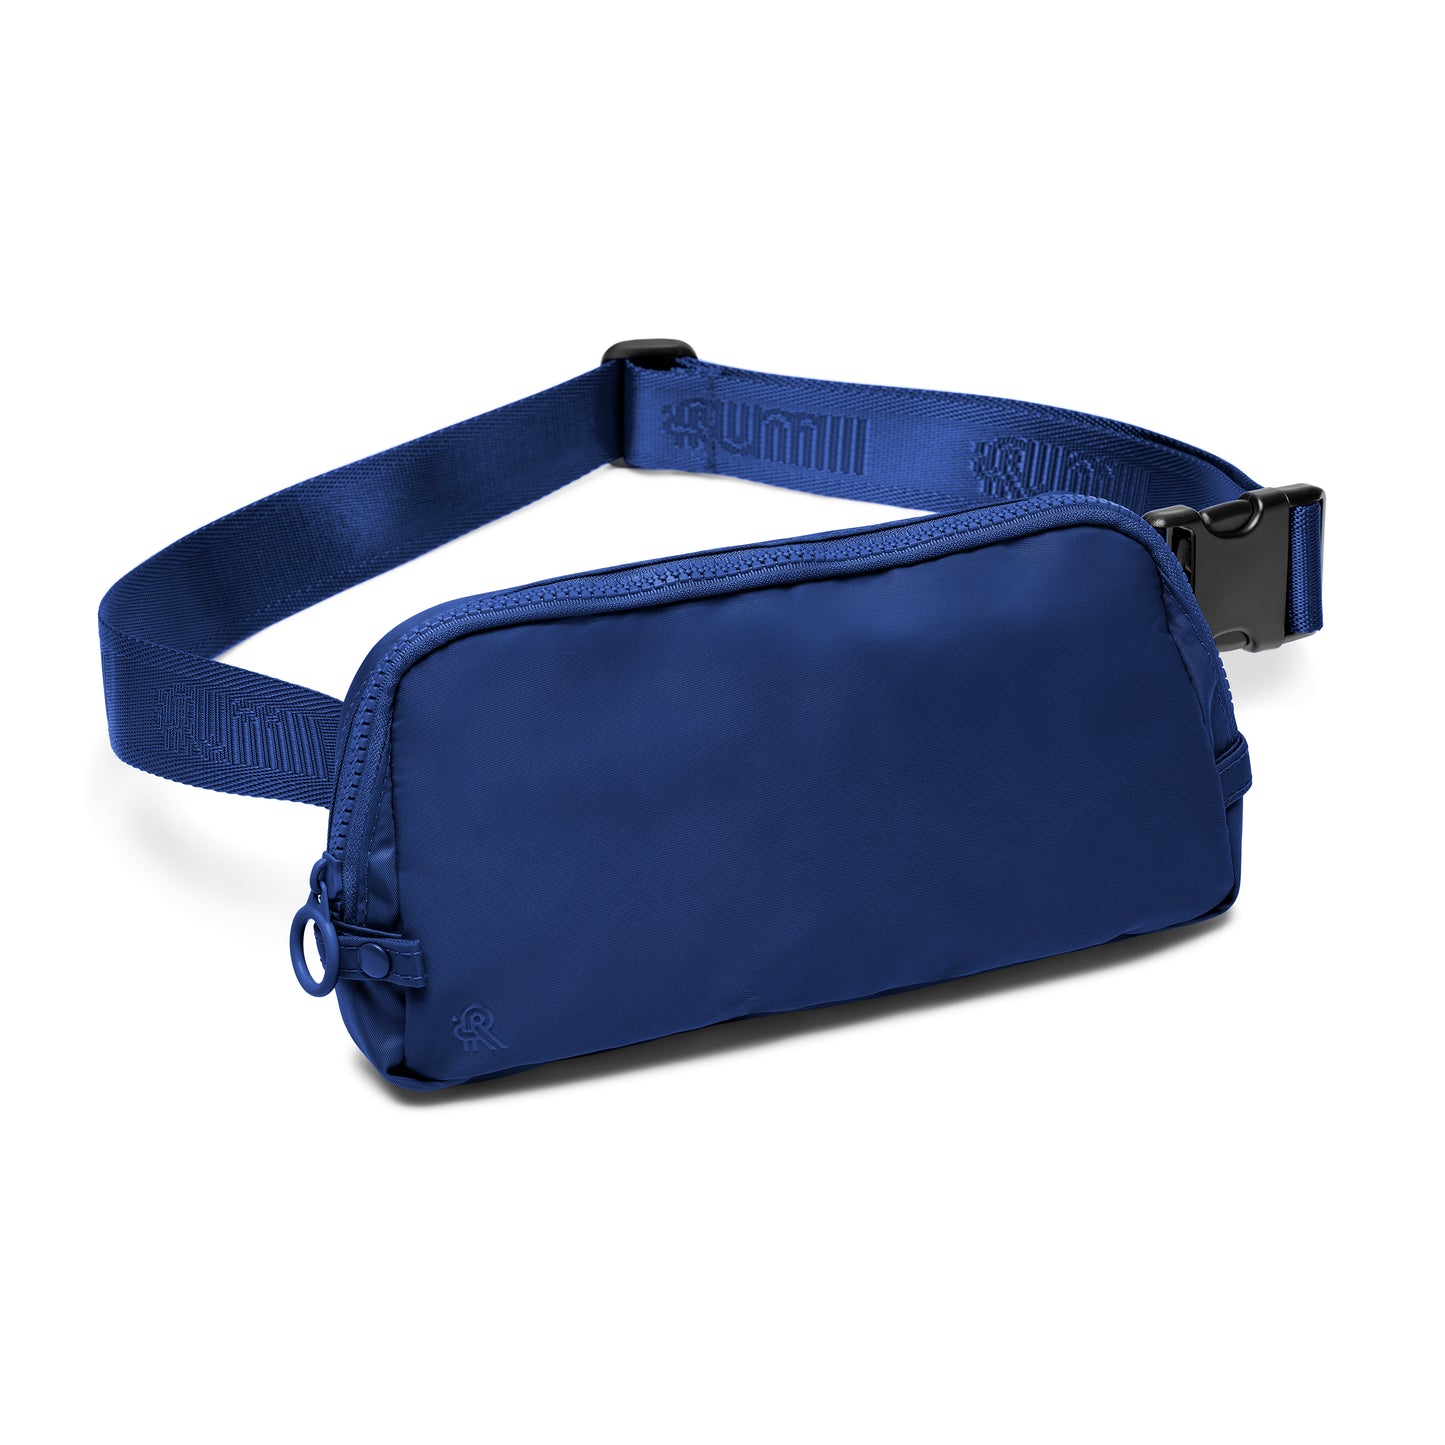 Navy blue bag for essential workers